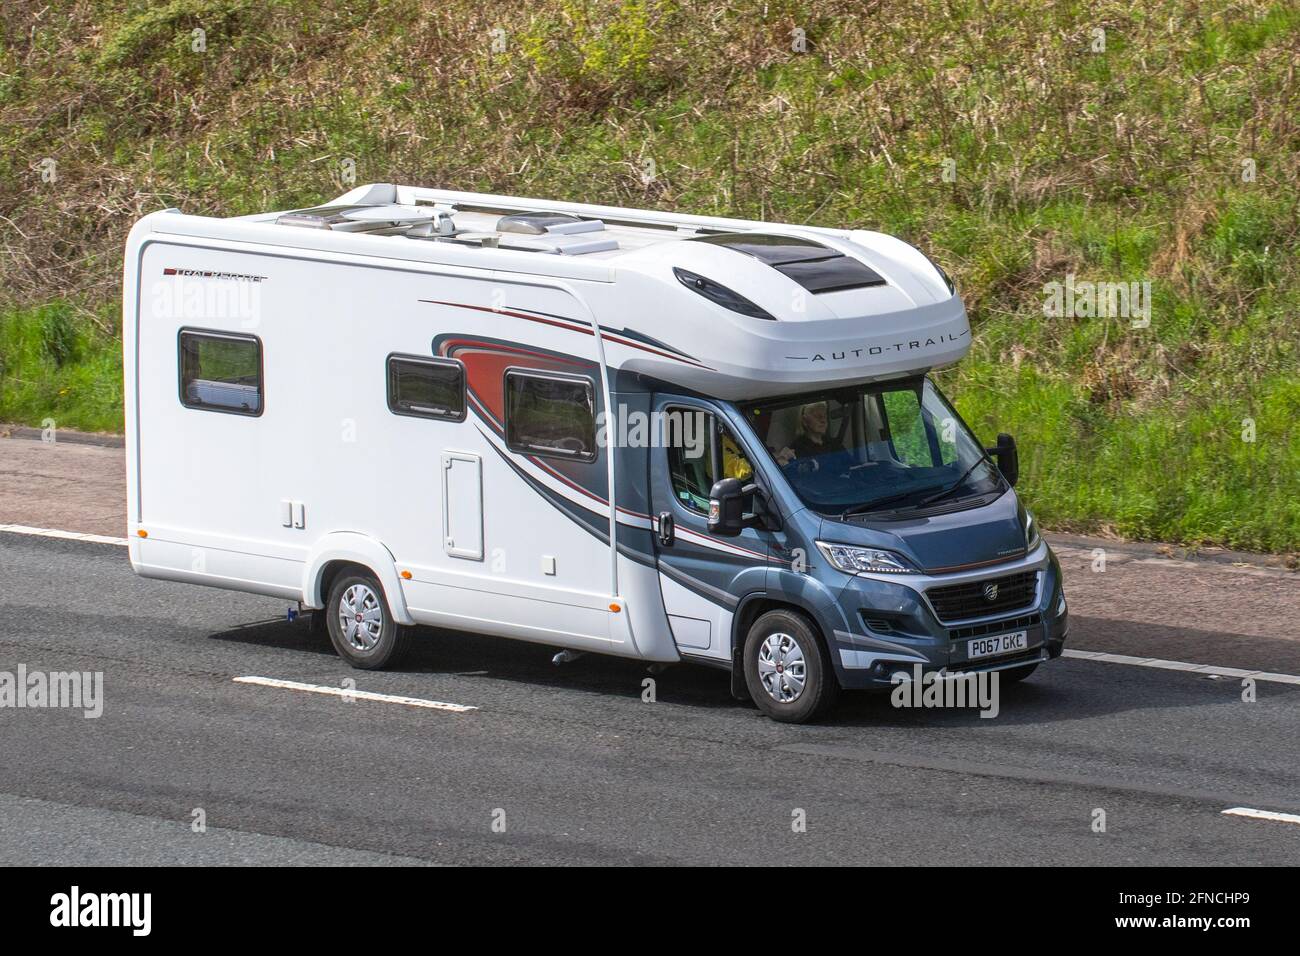 2017 Fiat Auto Trail Tracker Rb; Caravans and Motorhomes, campervans on Britain's roads, RV leisure vehicle, family holidays, caravanette vacations, Touring caravan holiday, van conversions, Vanagon autohome, life on the road,  auto-sleeper Stock Photo